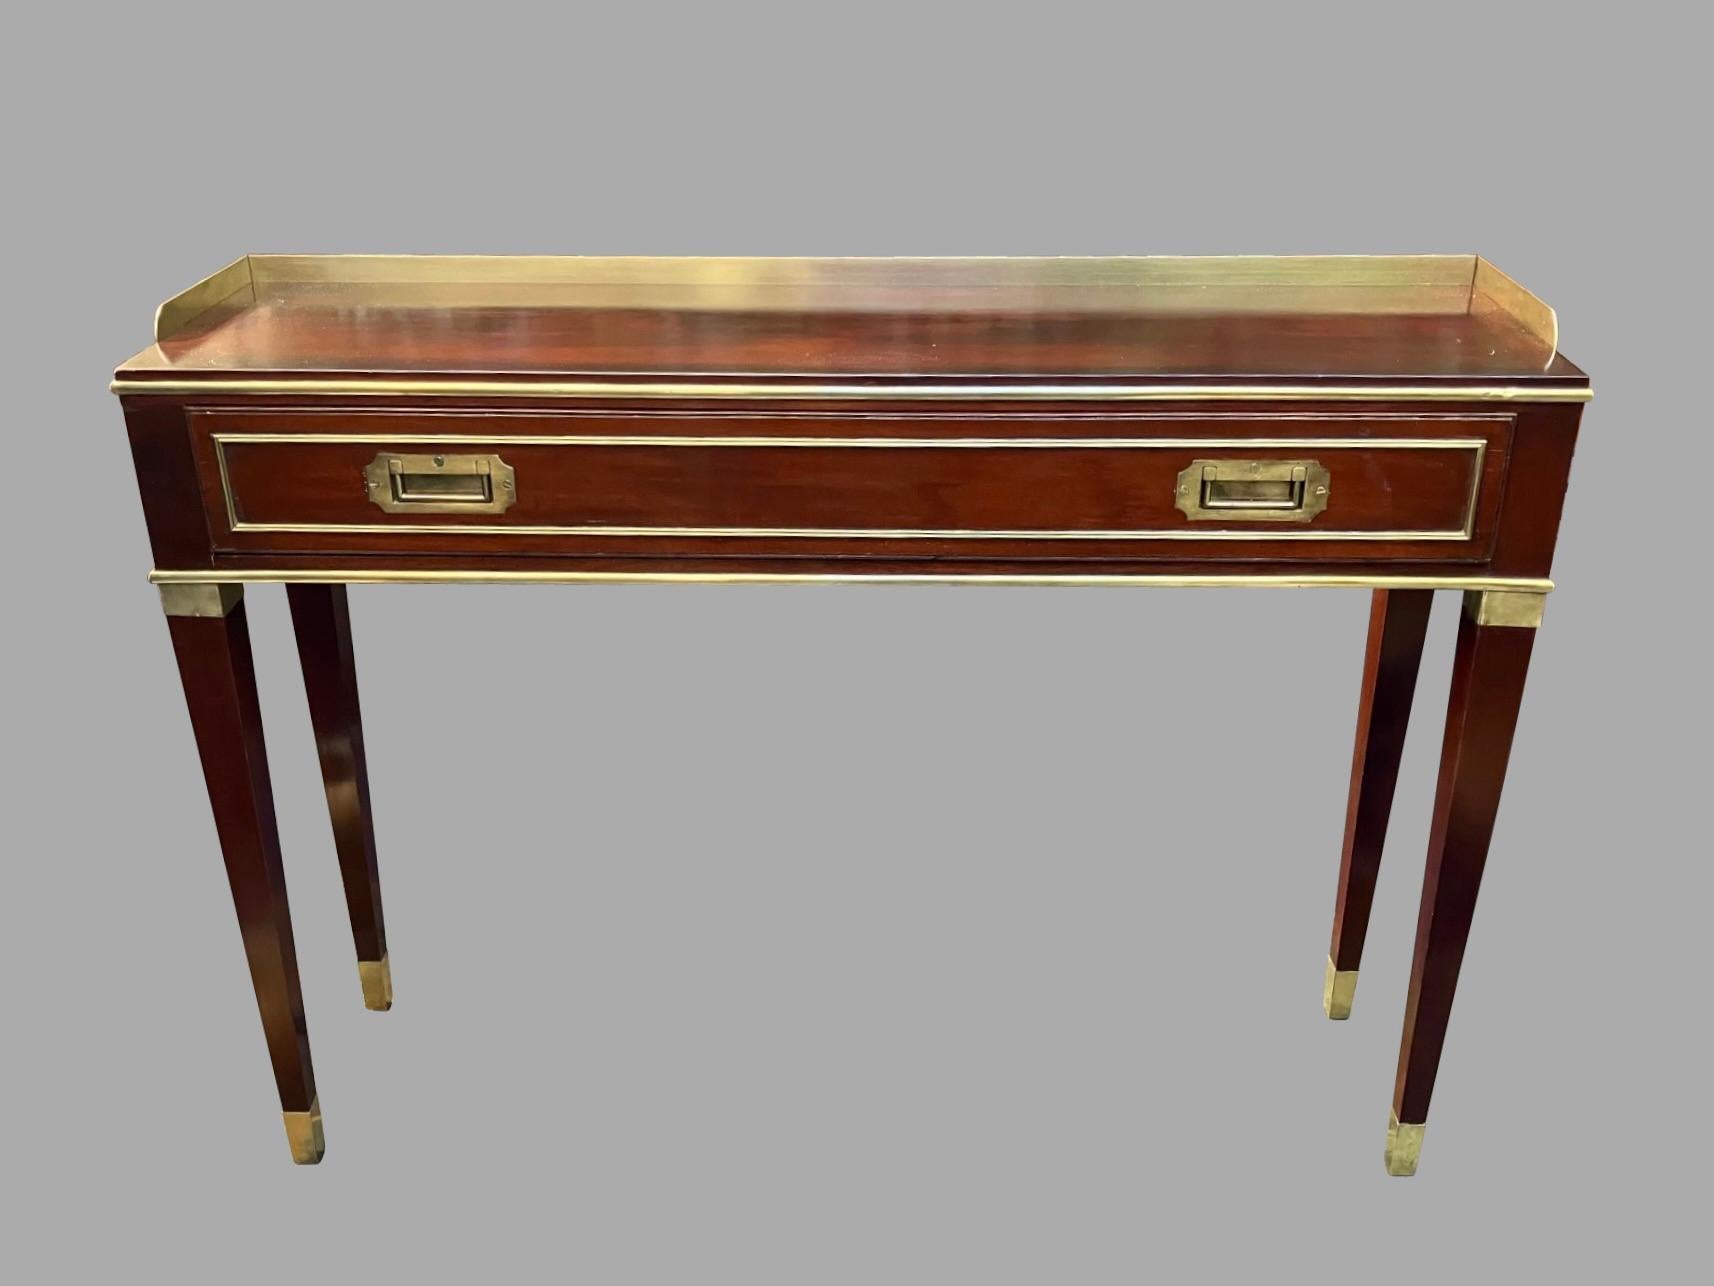 An elegant English mahogany campaign style brass mounted console or sofa table, of unusually narrow proportions, possibly a custom made piece for a yacht, the top with a solid brass gallery above a long frieze drawer fitted with two recessed